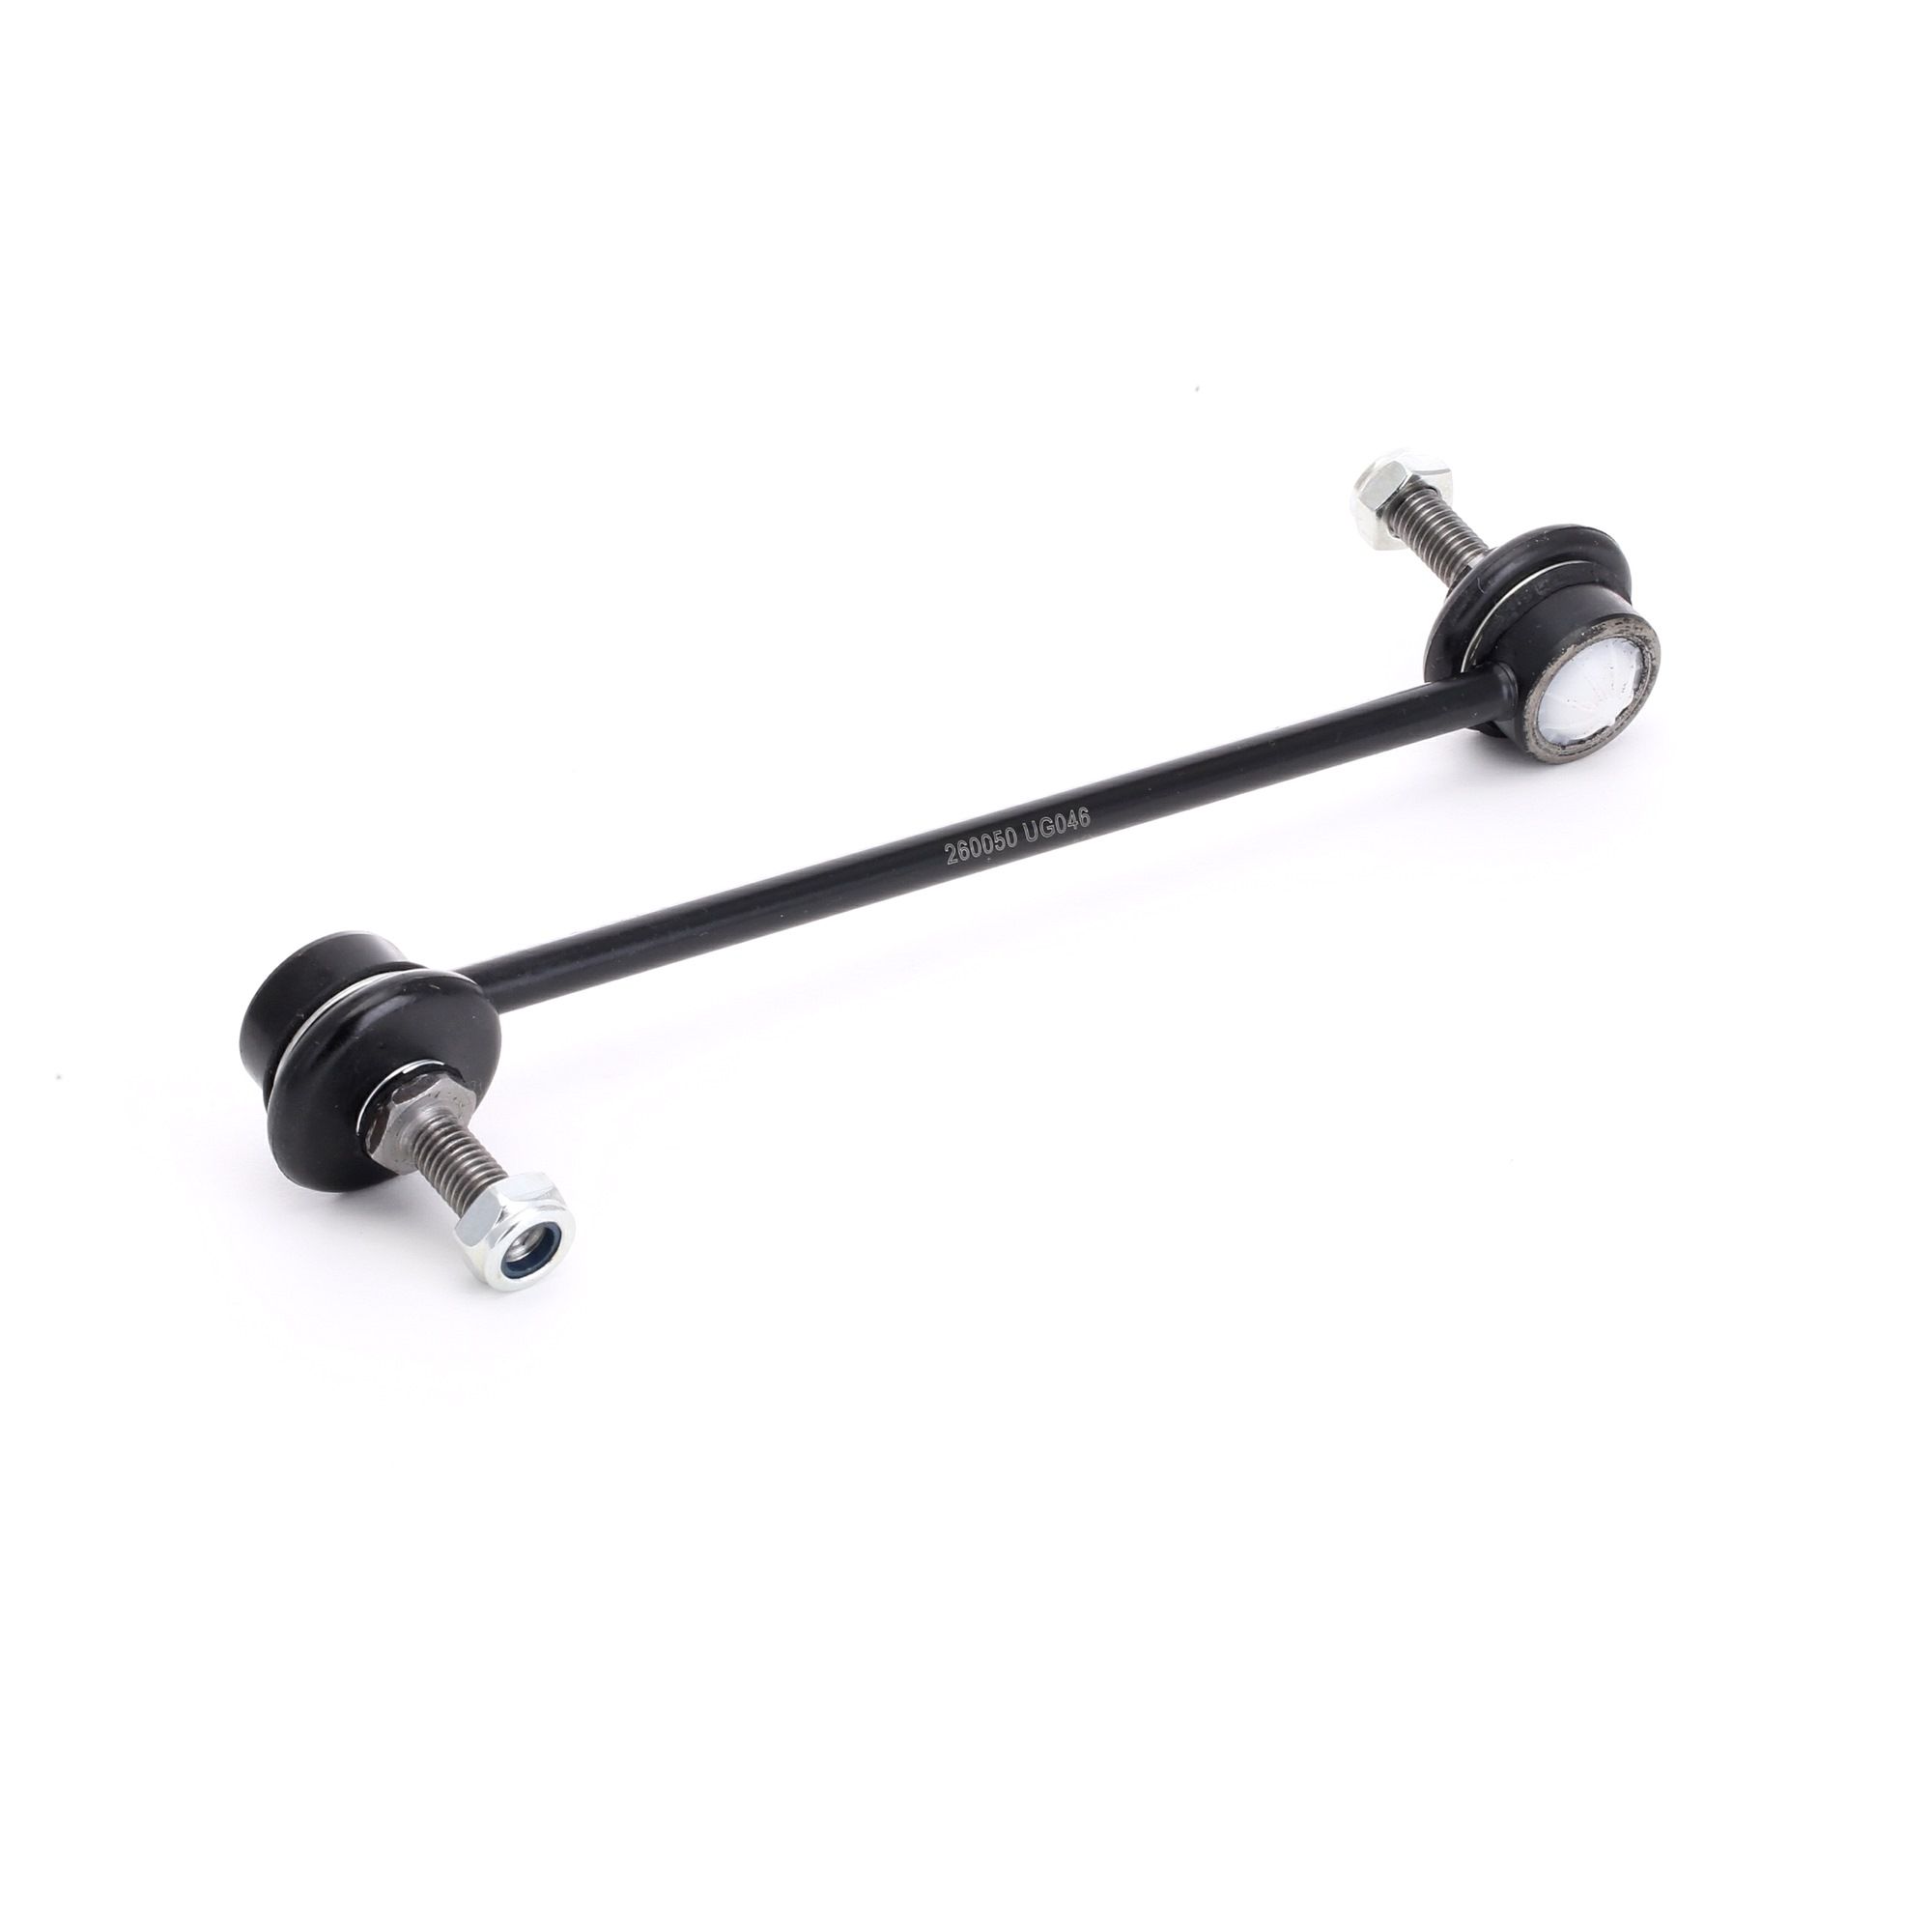 Ford FOCUS Anti-roll bar links 7712900 A.B.S. 260050 online buy